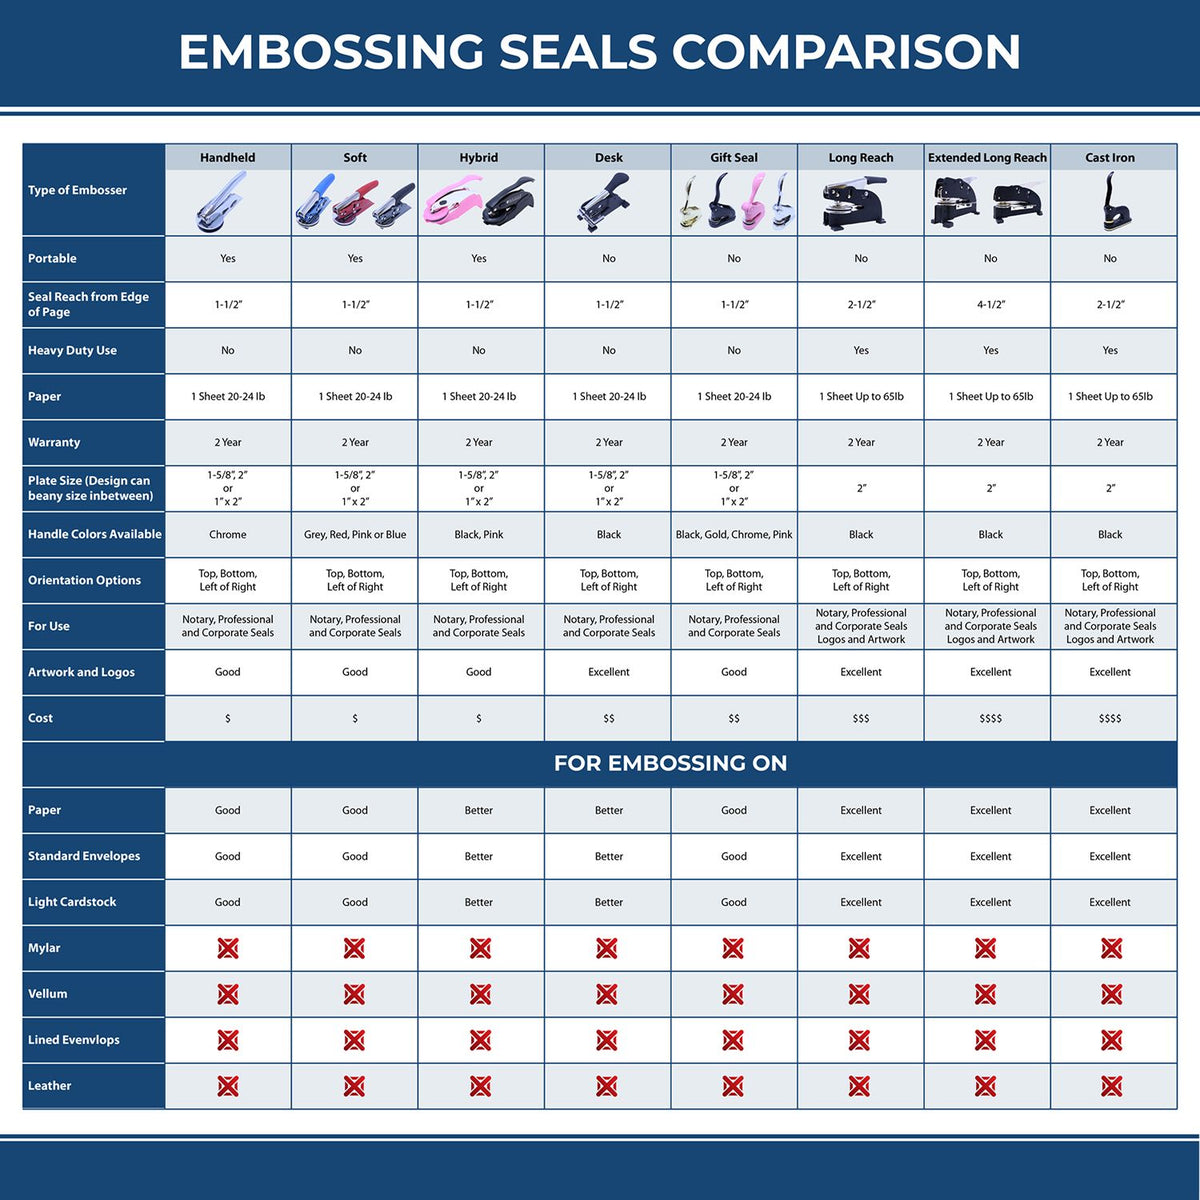 A comparison chart for the different types of mount models available for the Extended Long Reach Alabama Surveyor Embosser.